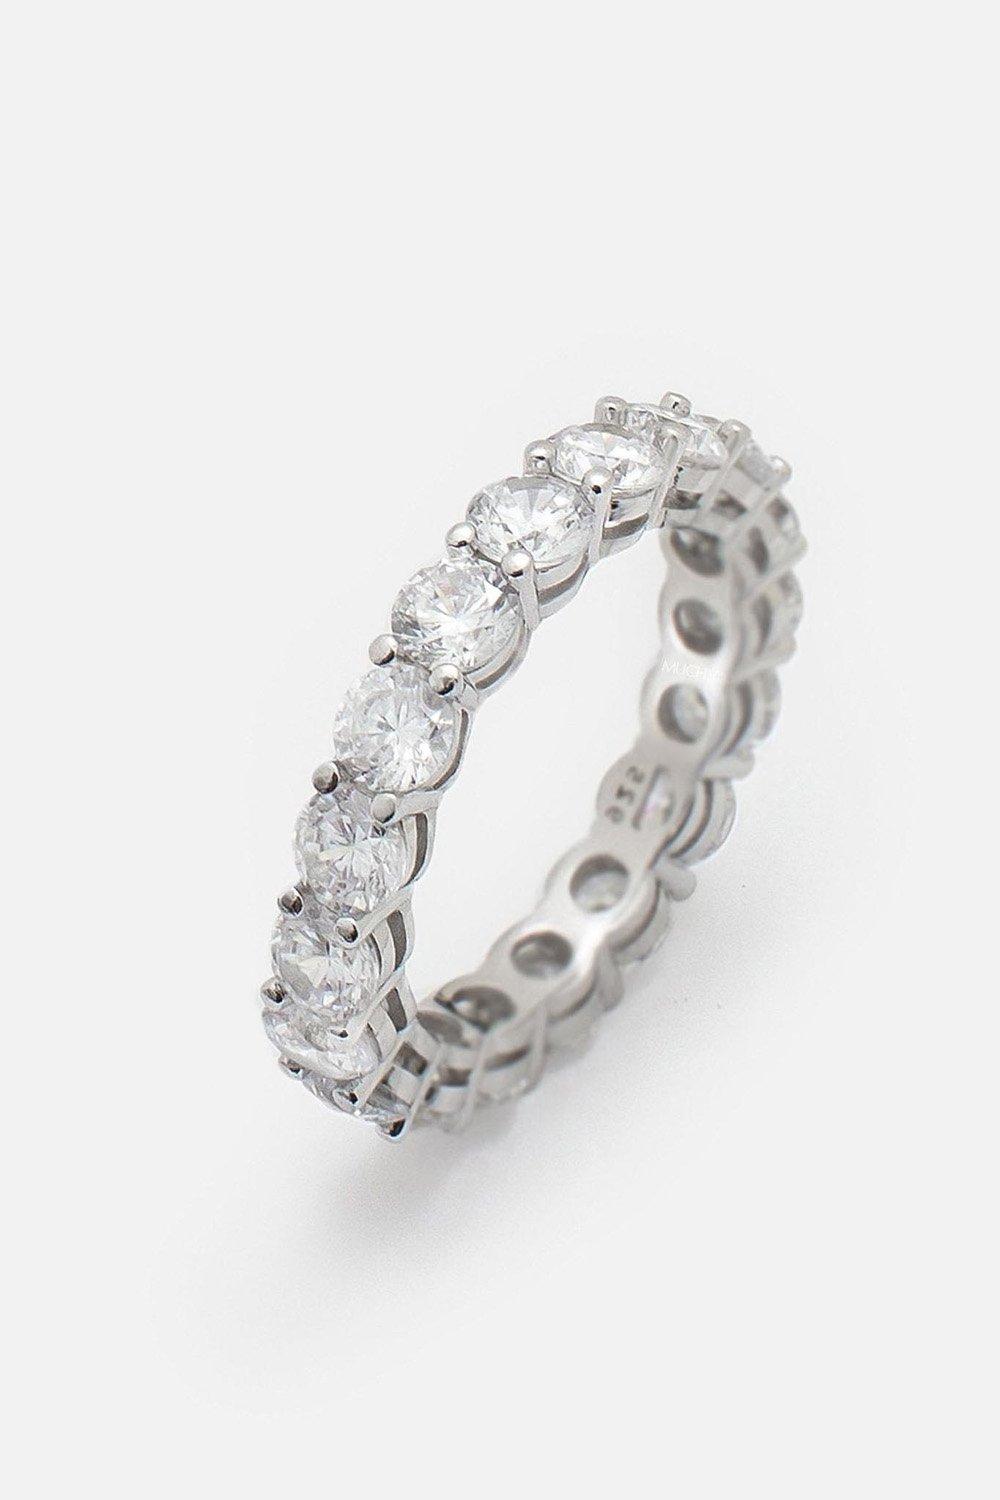 Silver Stacking Ring With Round Cubic Zirconia Stones